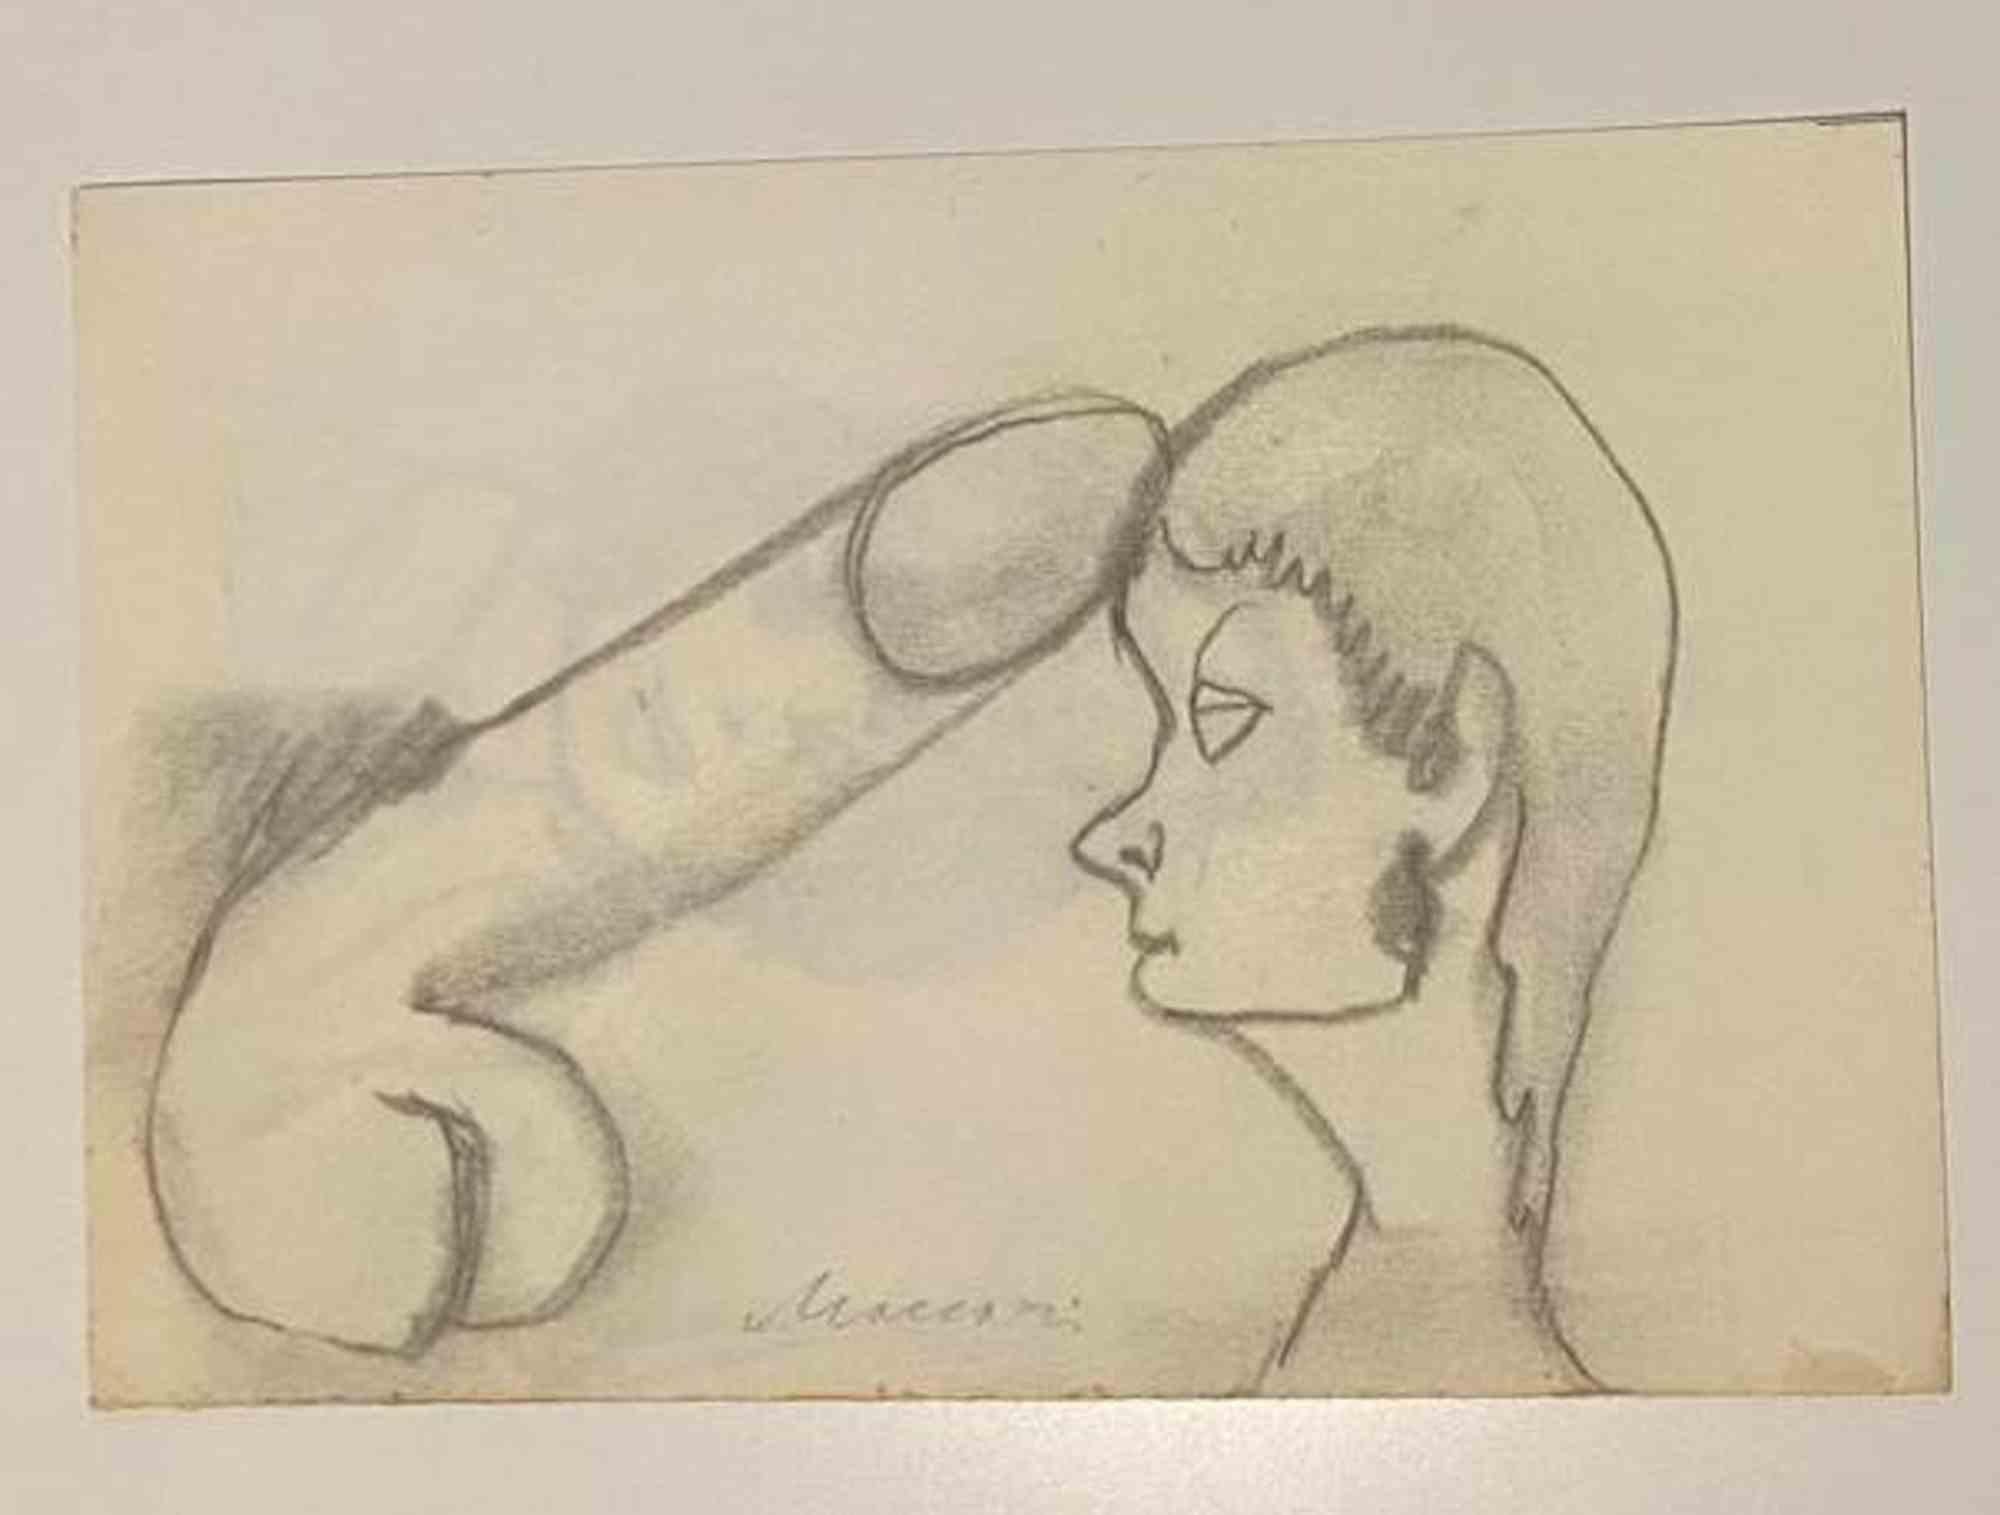 Fixation is a pencil Drawing realized by Mino Maccari  (1924-1989) in the Mid-20th Century.

Hand-signed on the lower.

Good conditions.

Mino Maccari (Siena, 1924-Rome, June 16, 1989) was an Italian writer, painter, engraver and journalist, winner